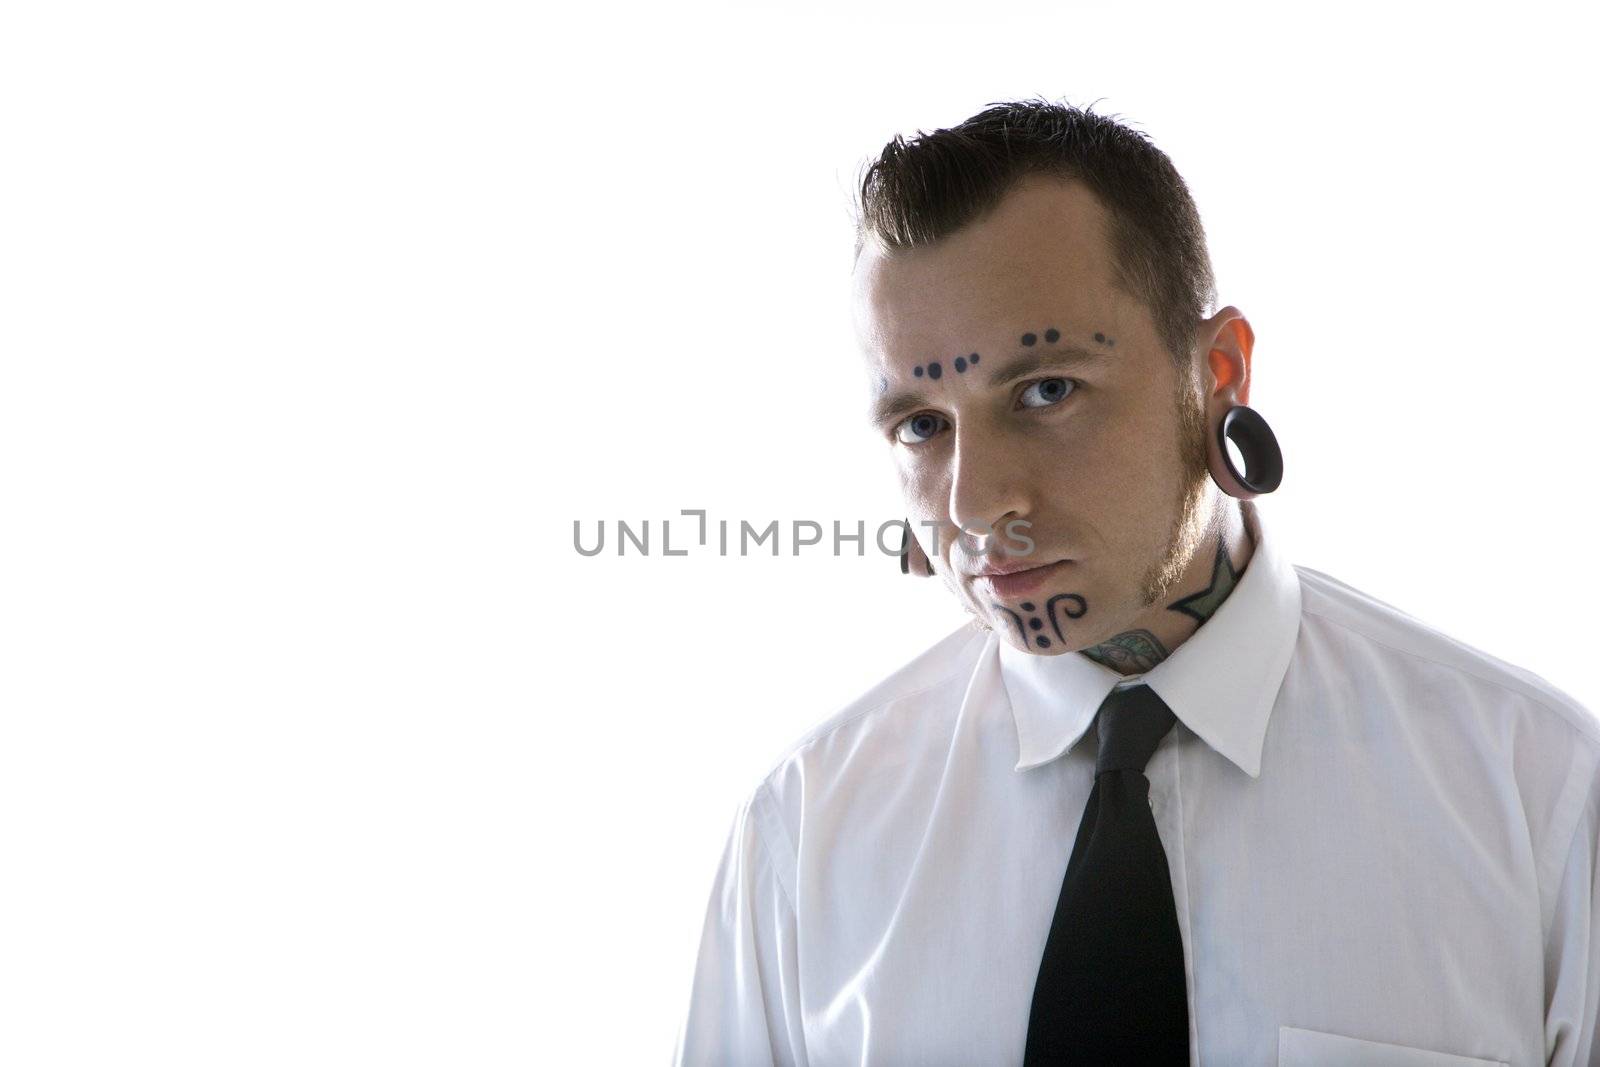 Caucasian mid-adult man with tattoos and piercings wearing necktie.